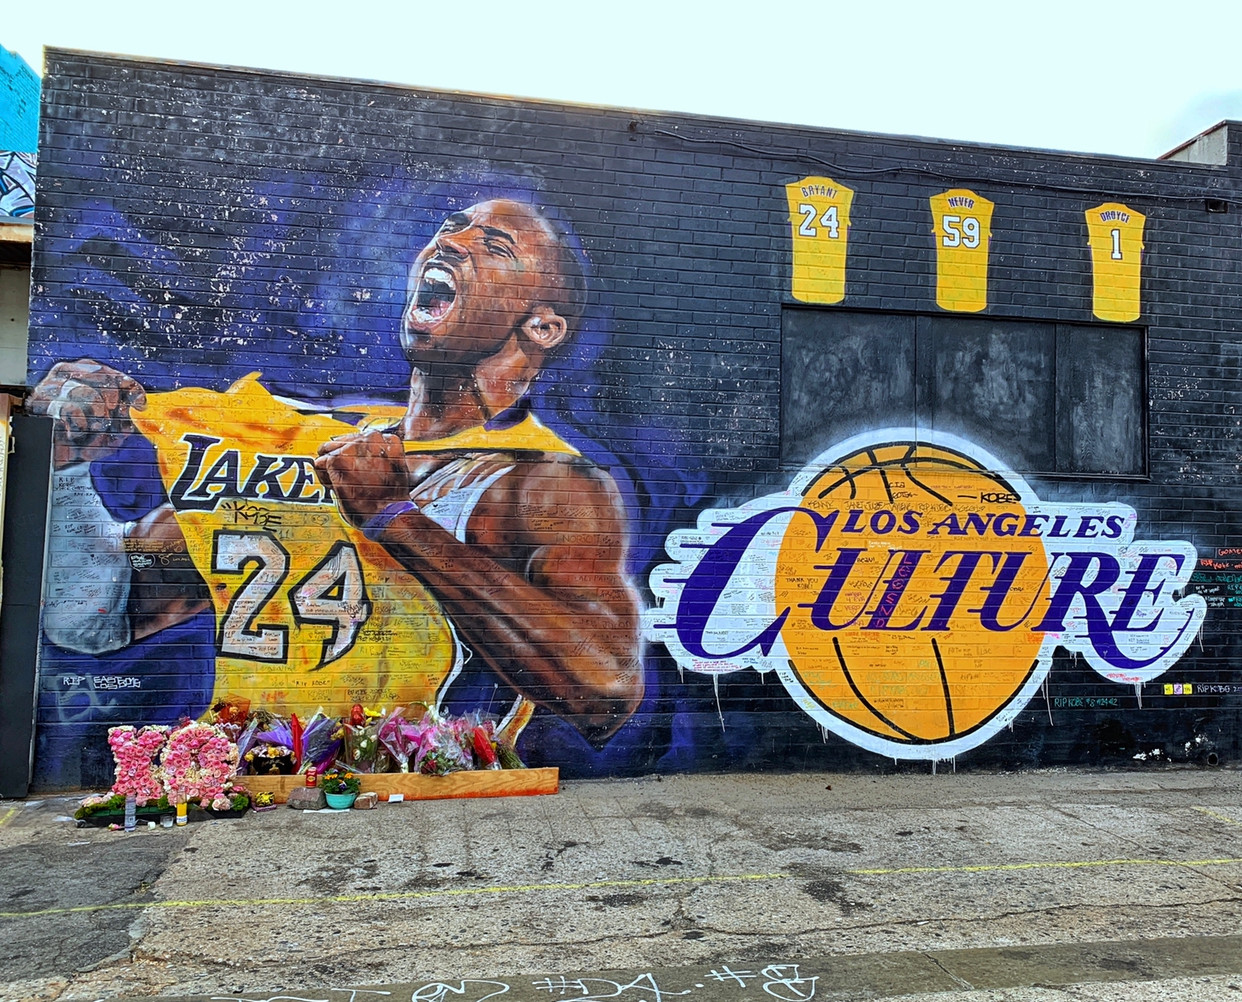 Kobe gianna bryant murals locations in los angeles and worldwide